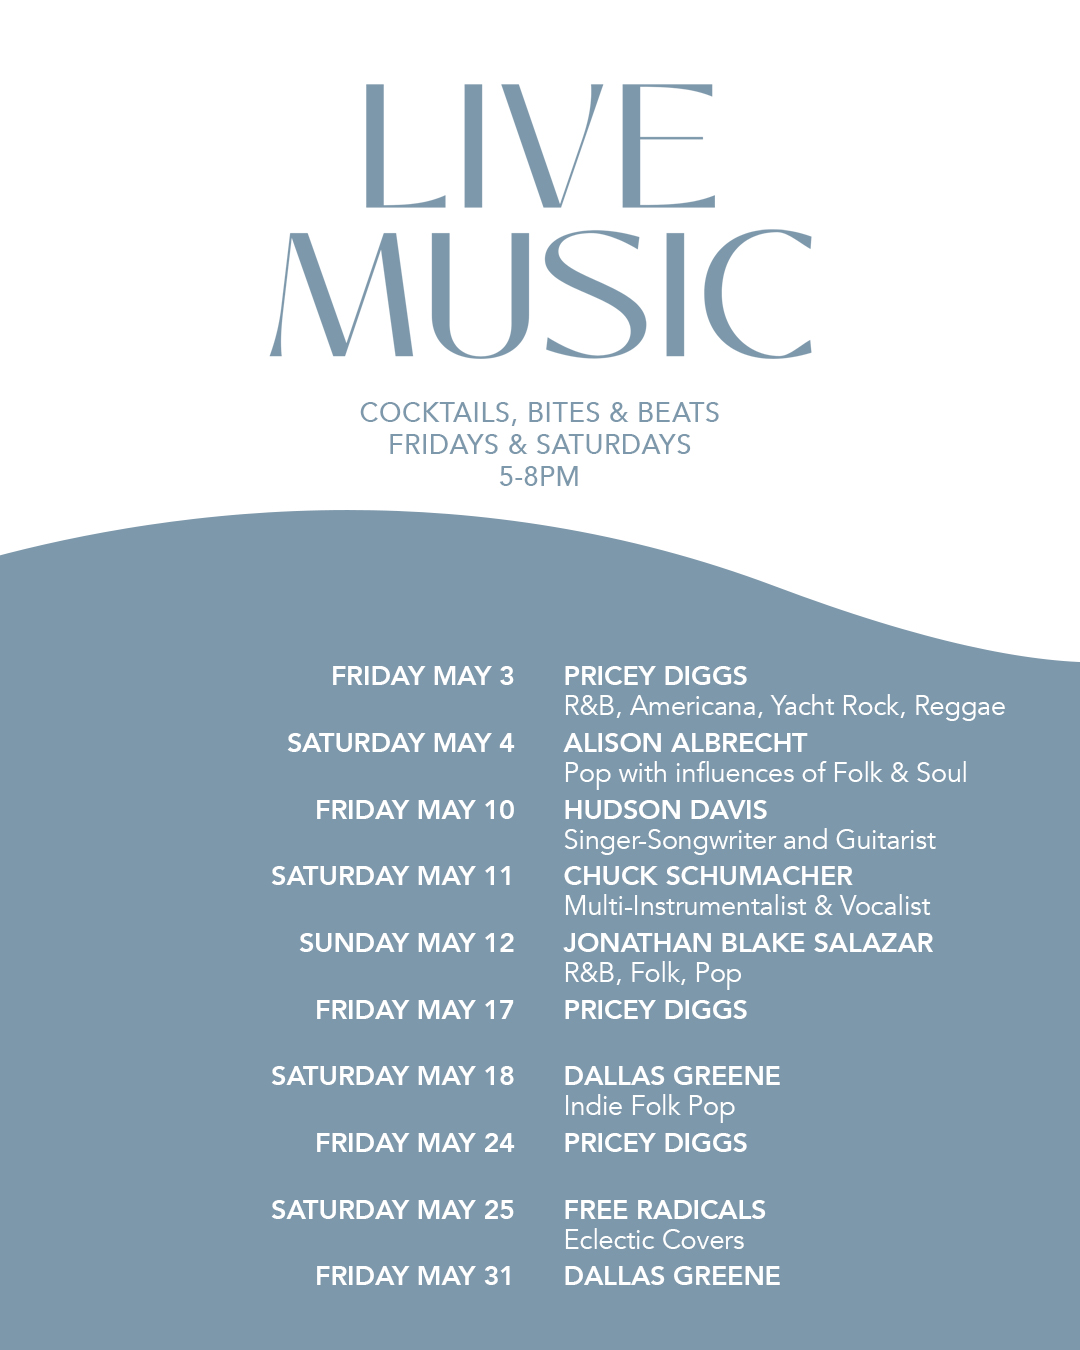 Live Music promotional poster